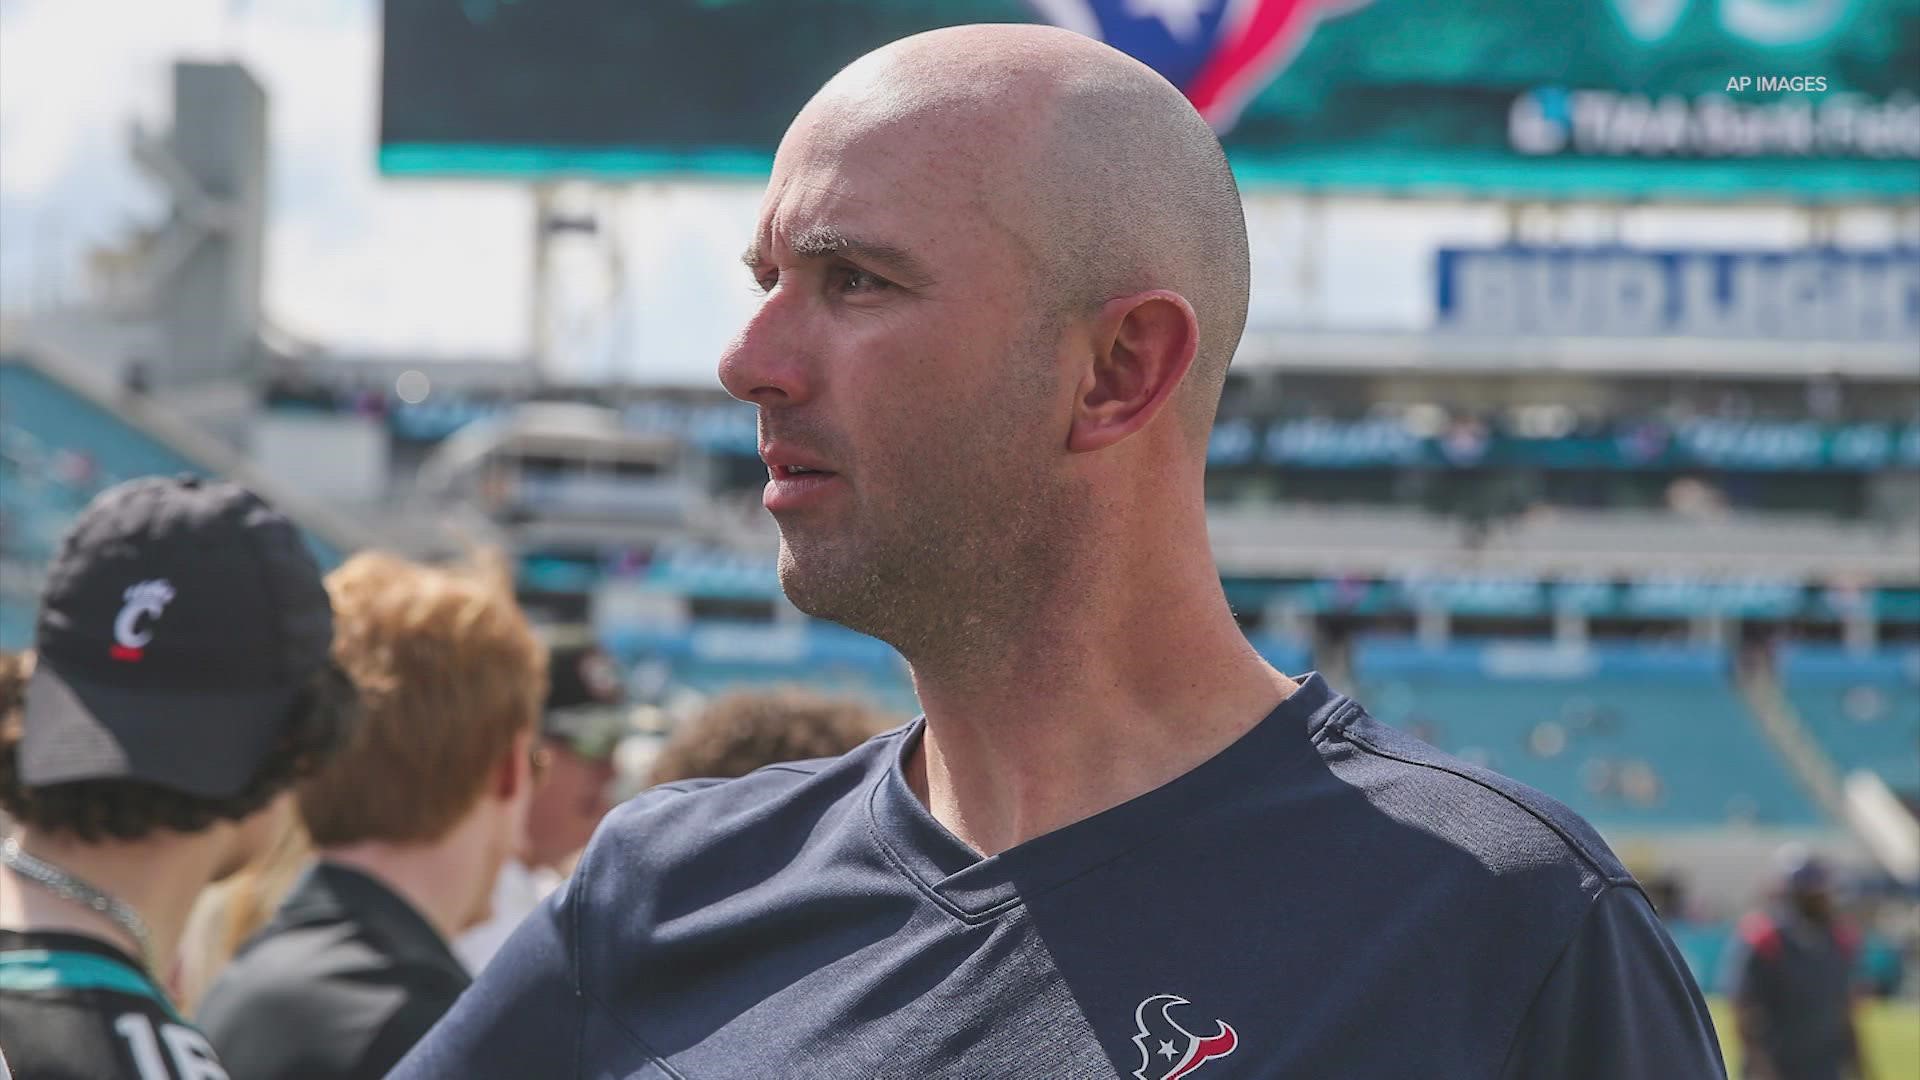 Easterby joined the Texans in April 2019 and was promoted to executive vice president in January 2020.